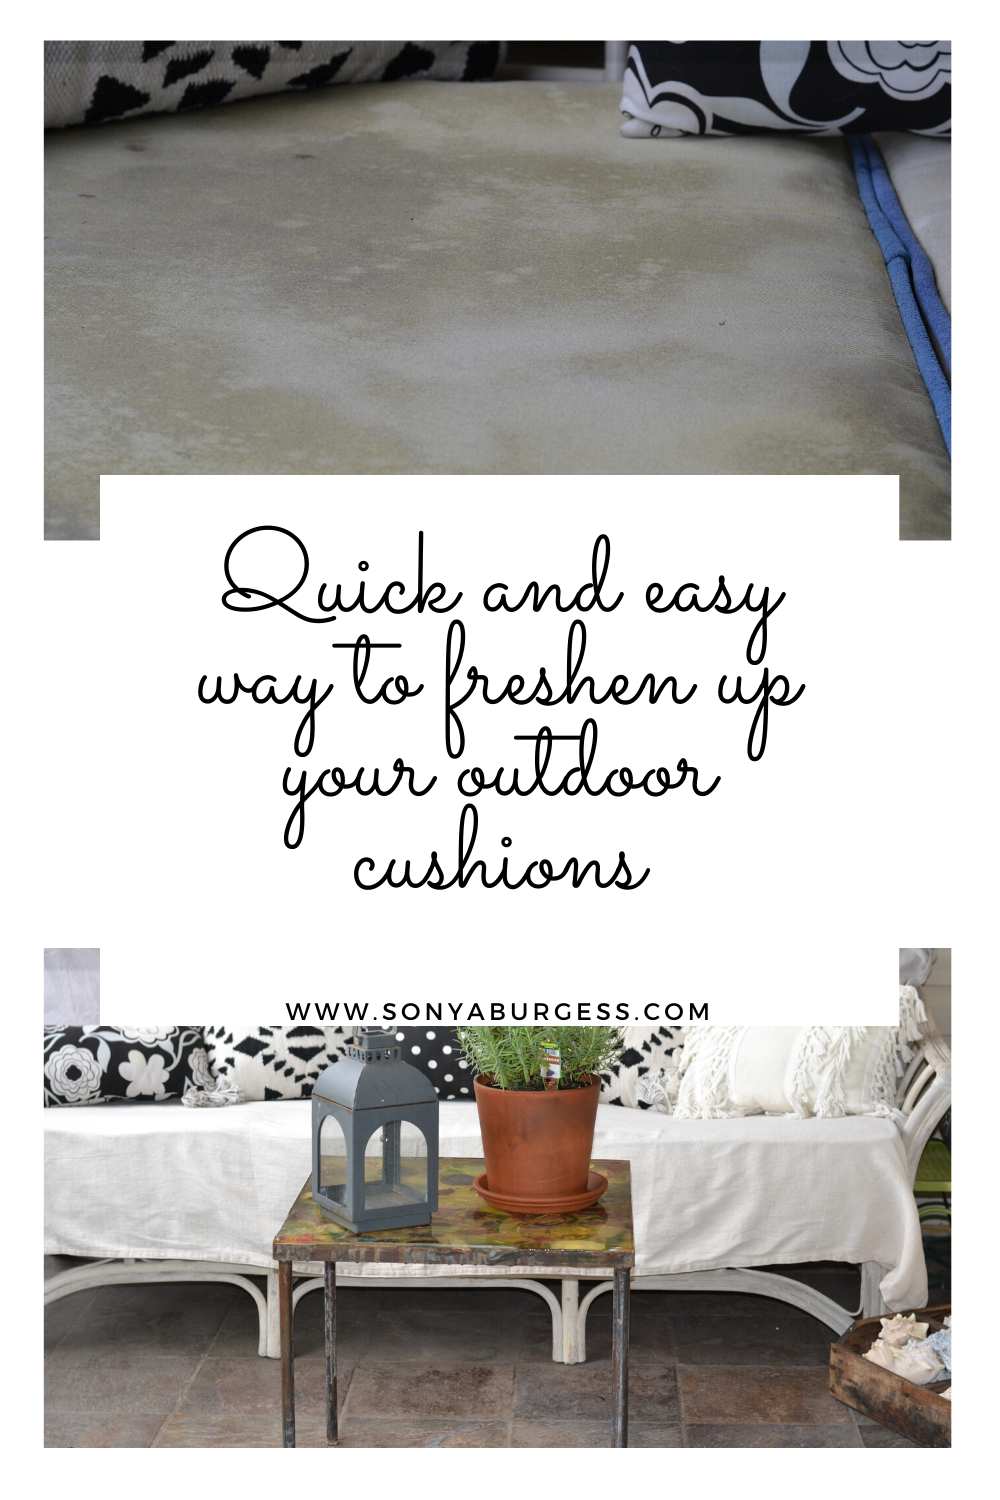 Quick and easy way to freshen up your outdoor cushions